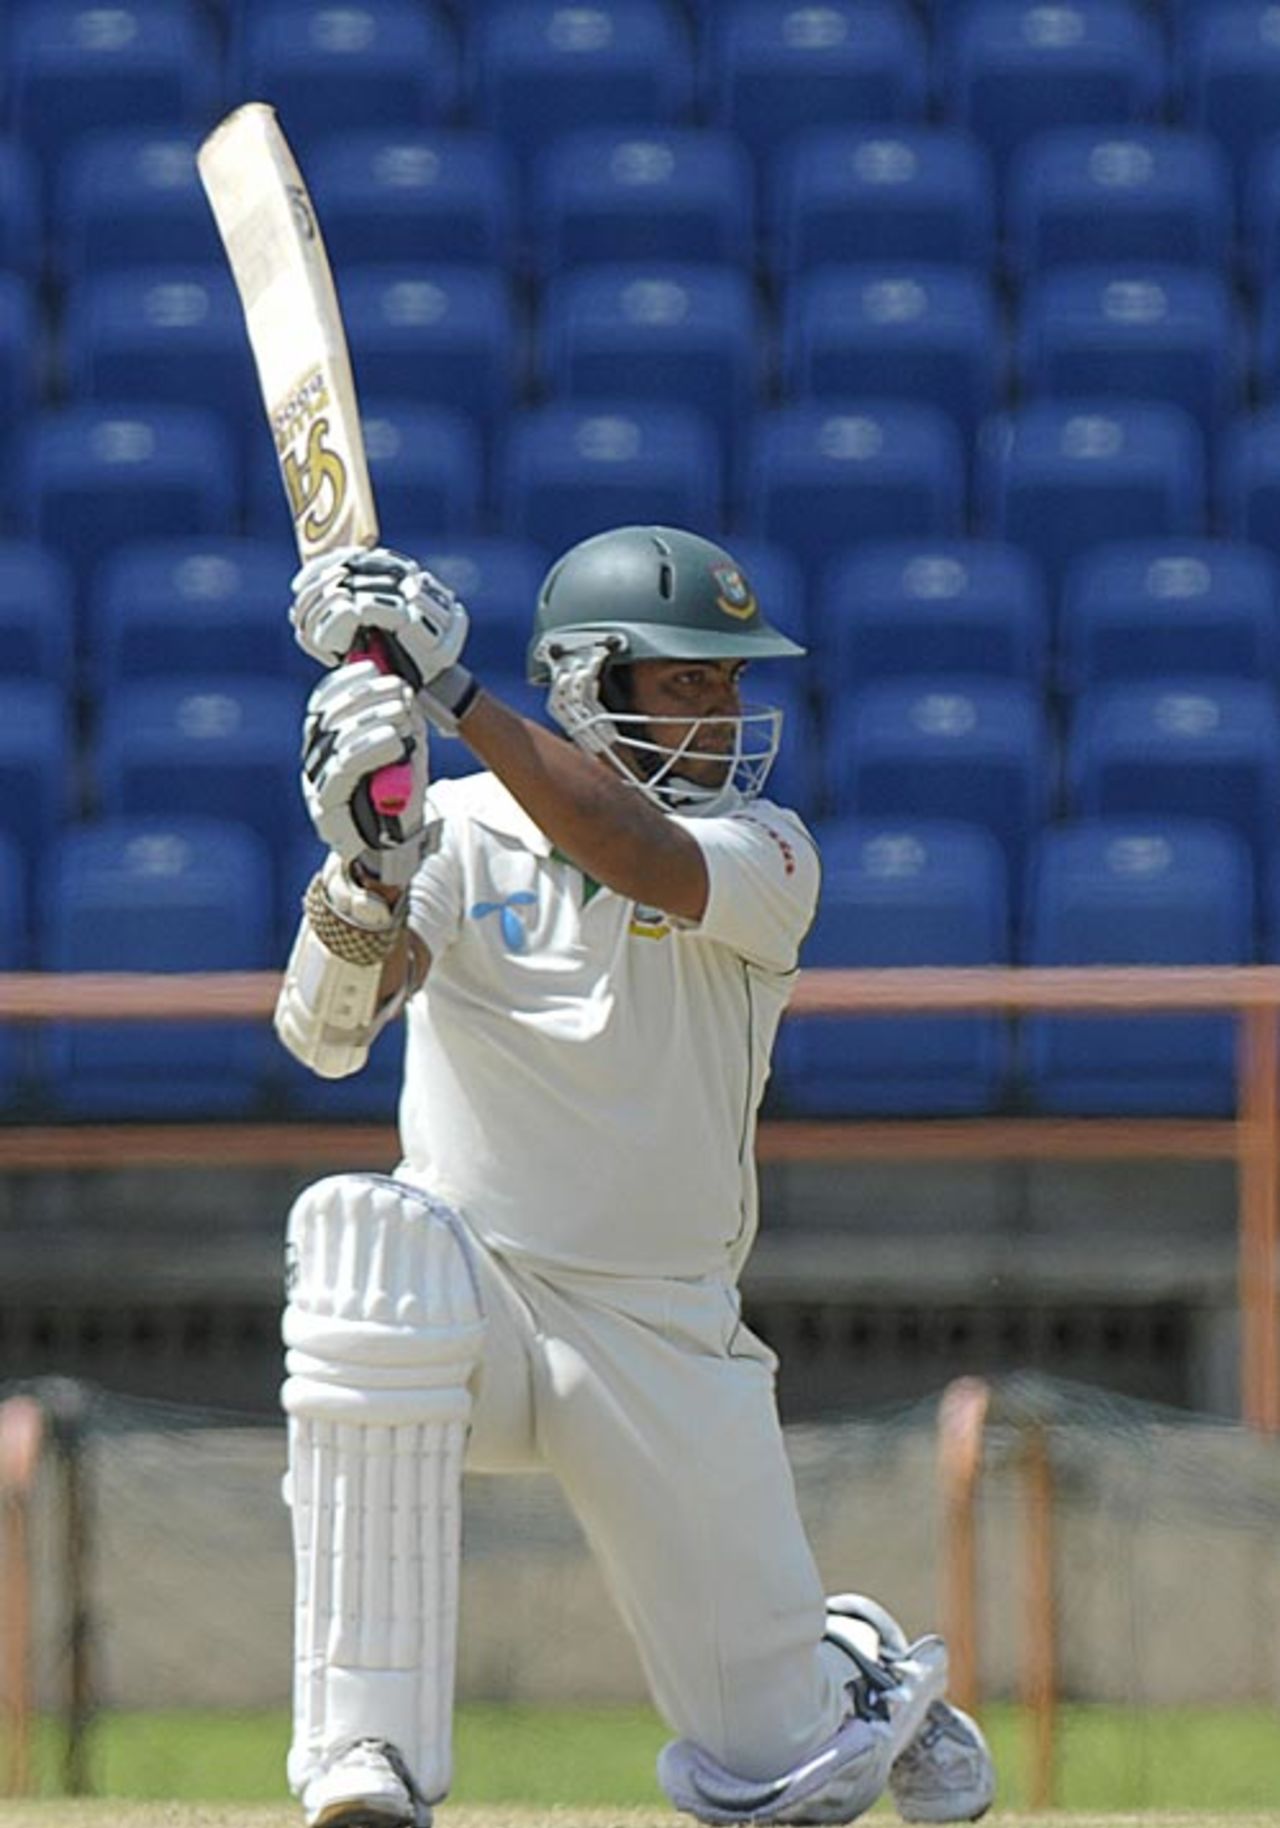 Tamim Iqbal made a fluent 37, West Indies v Bangladesh, 2nd Test, Grenada, 2nd day, July 18, 2009